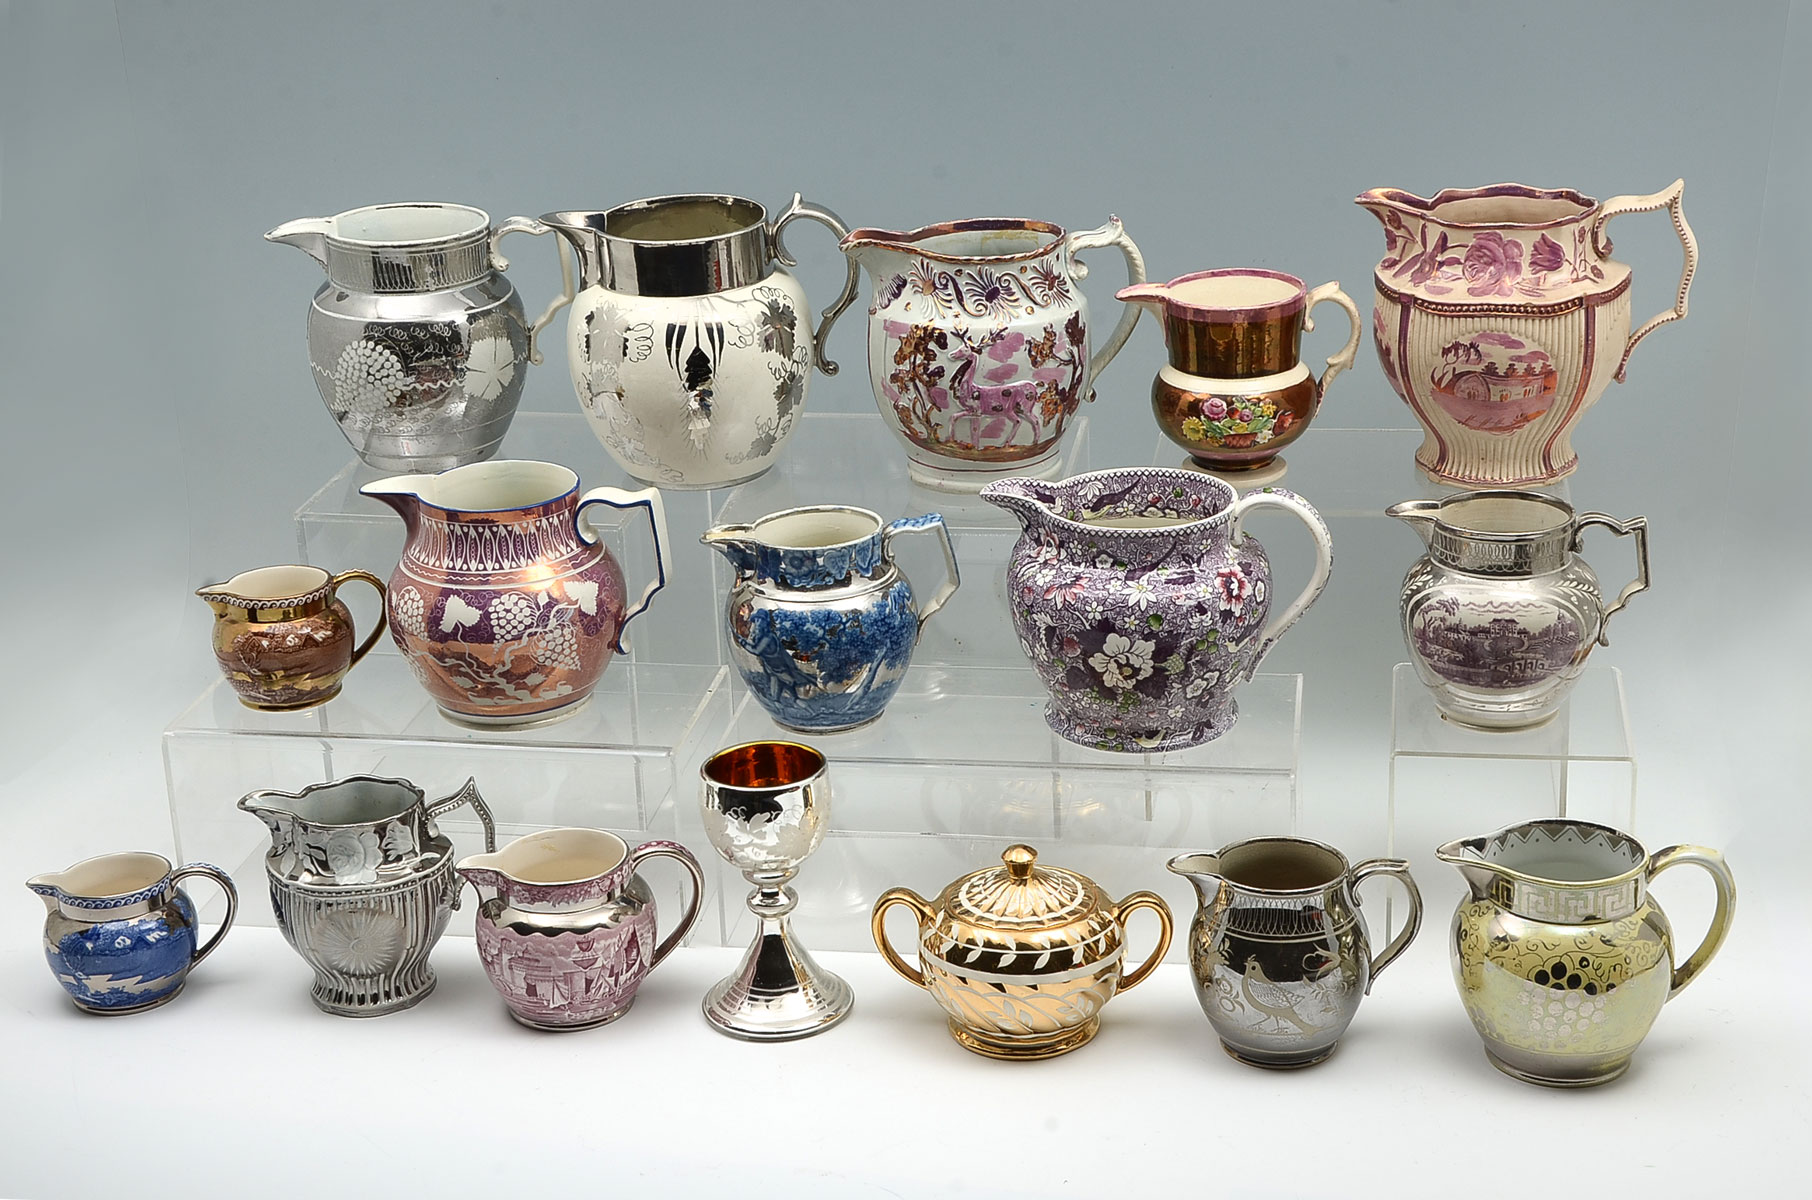 17 PIECE LUSTERWARE COLLECTION: